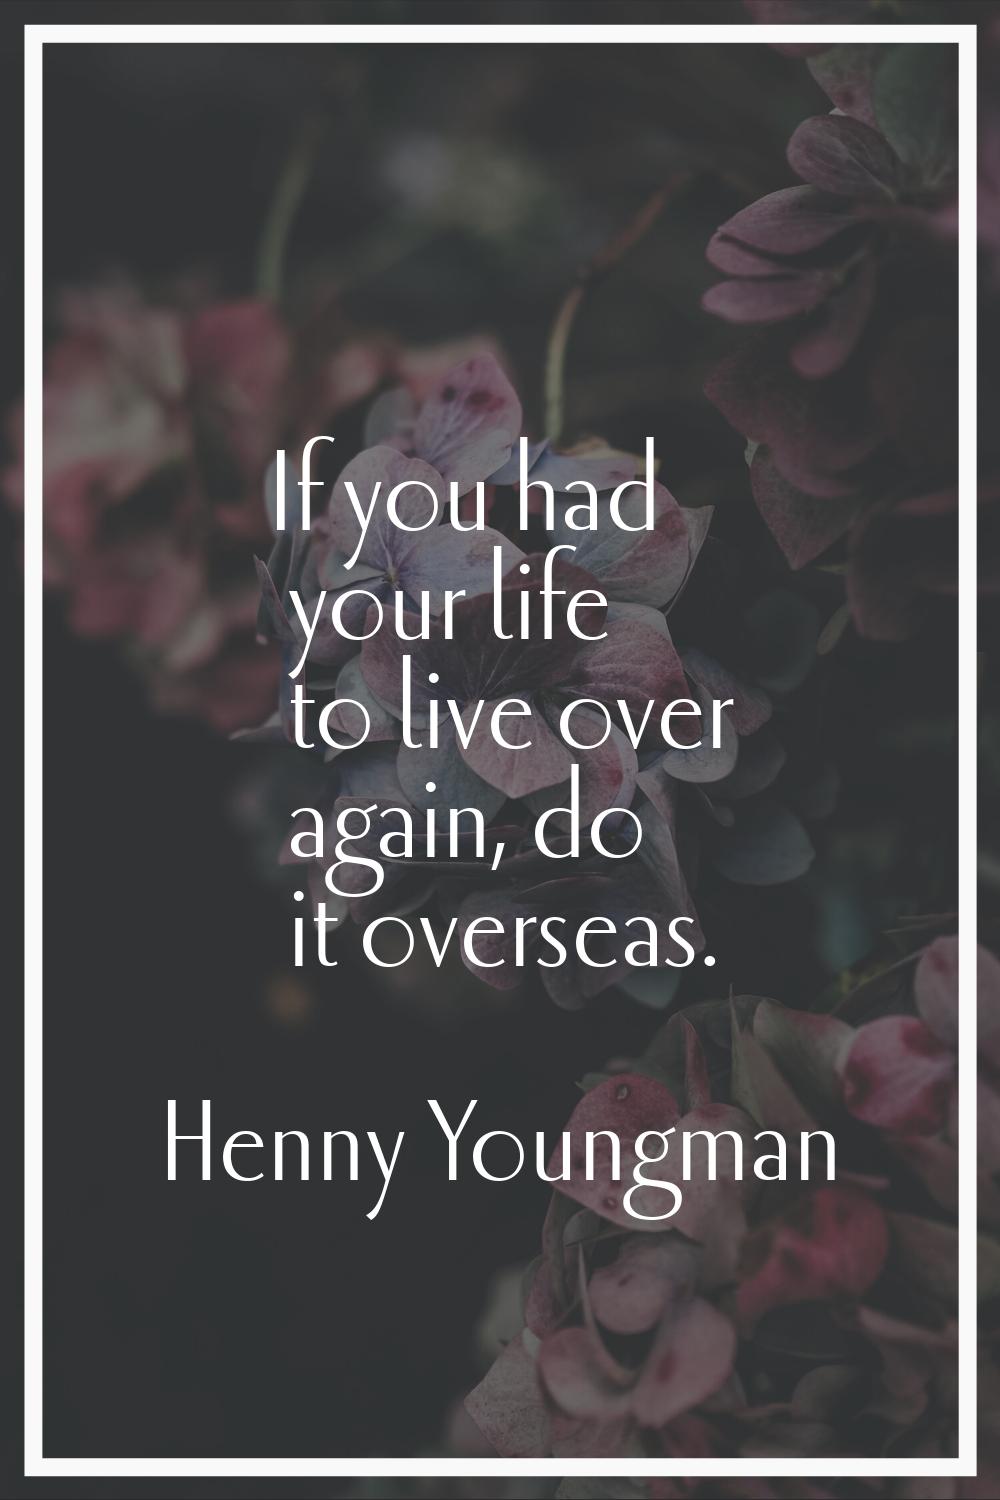 If you had your life to live over again, do it overseas.